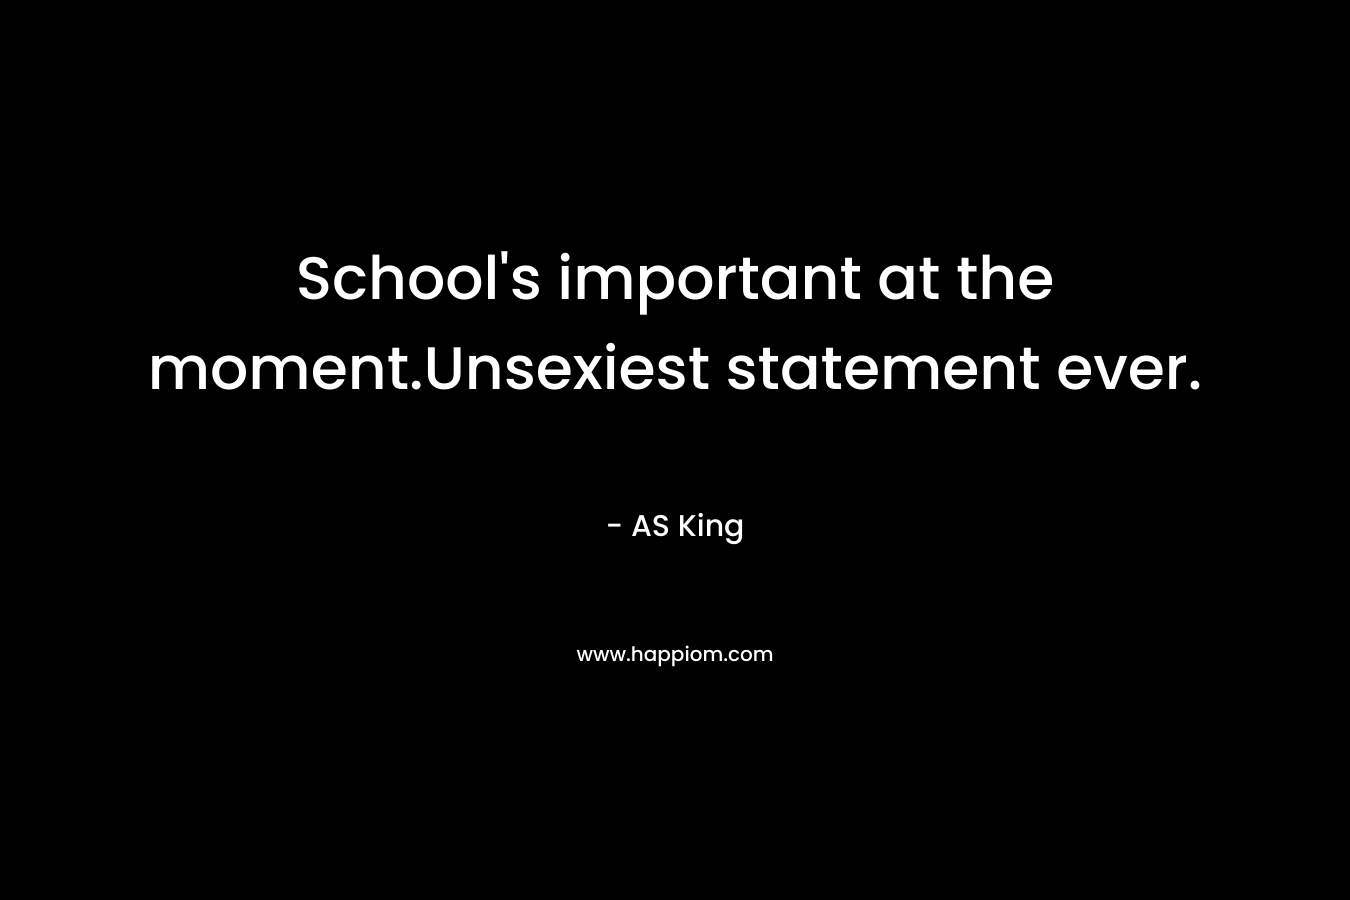 School's important at the moment.Unsexiest statement ever.